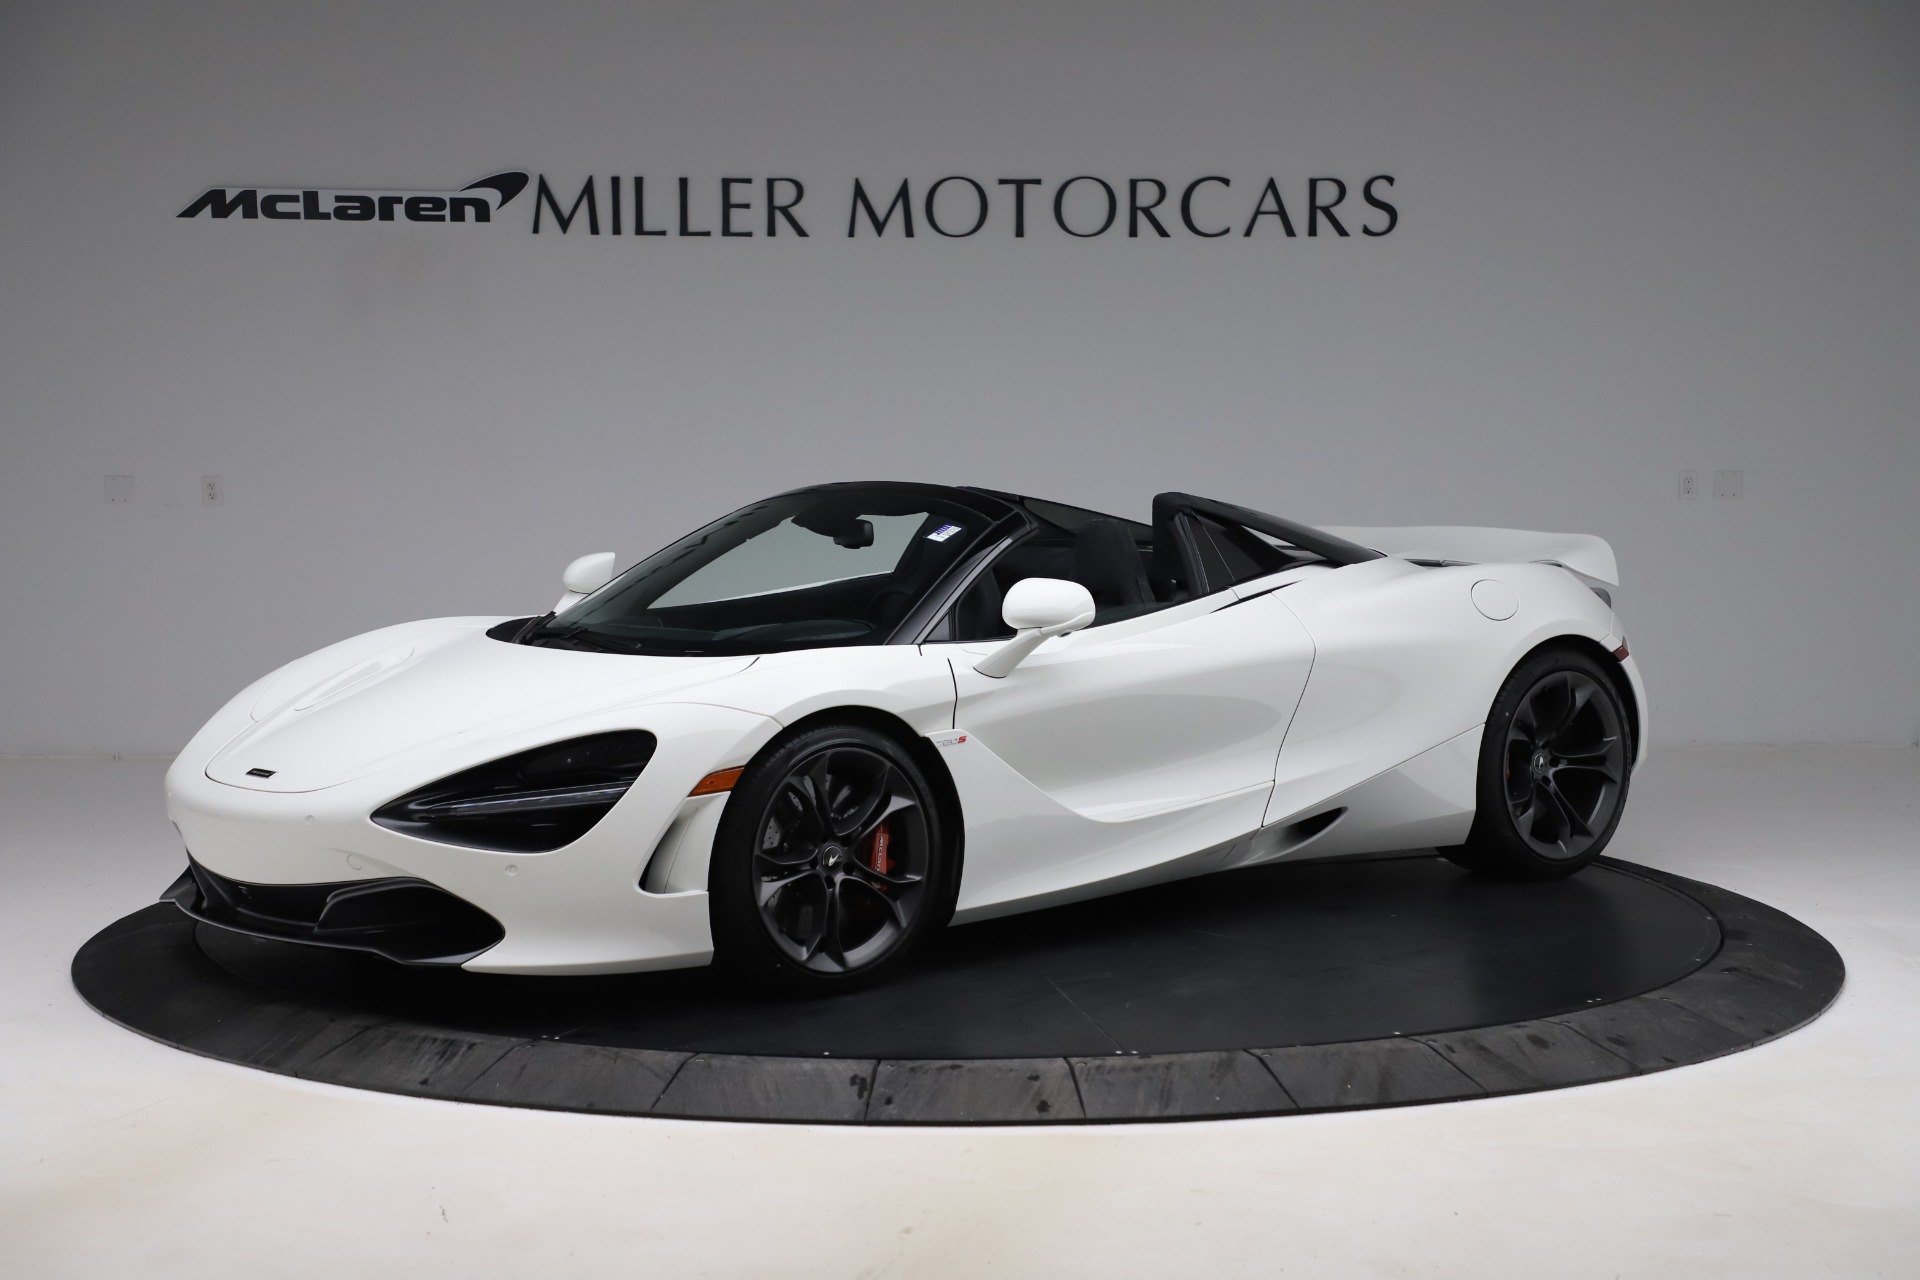 Used 2020 McLaren 720S Spider for sale $317,500 at Bentley Greenwich in Greenwich CT 06830 1